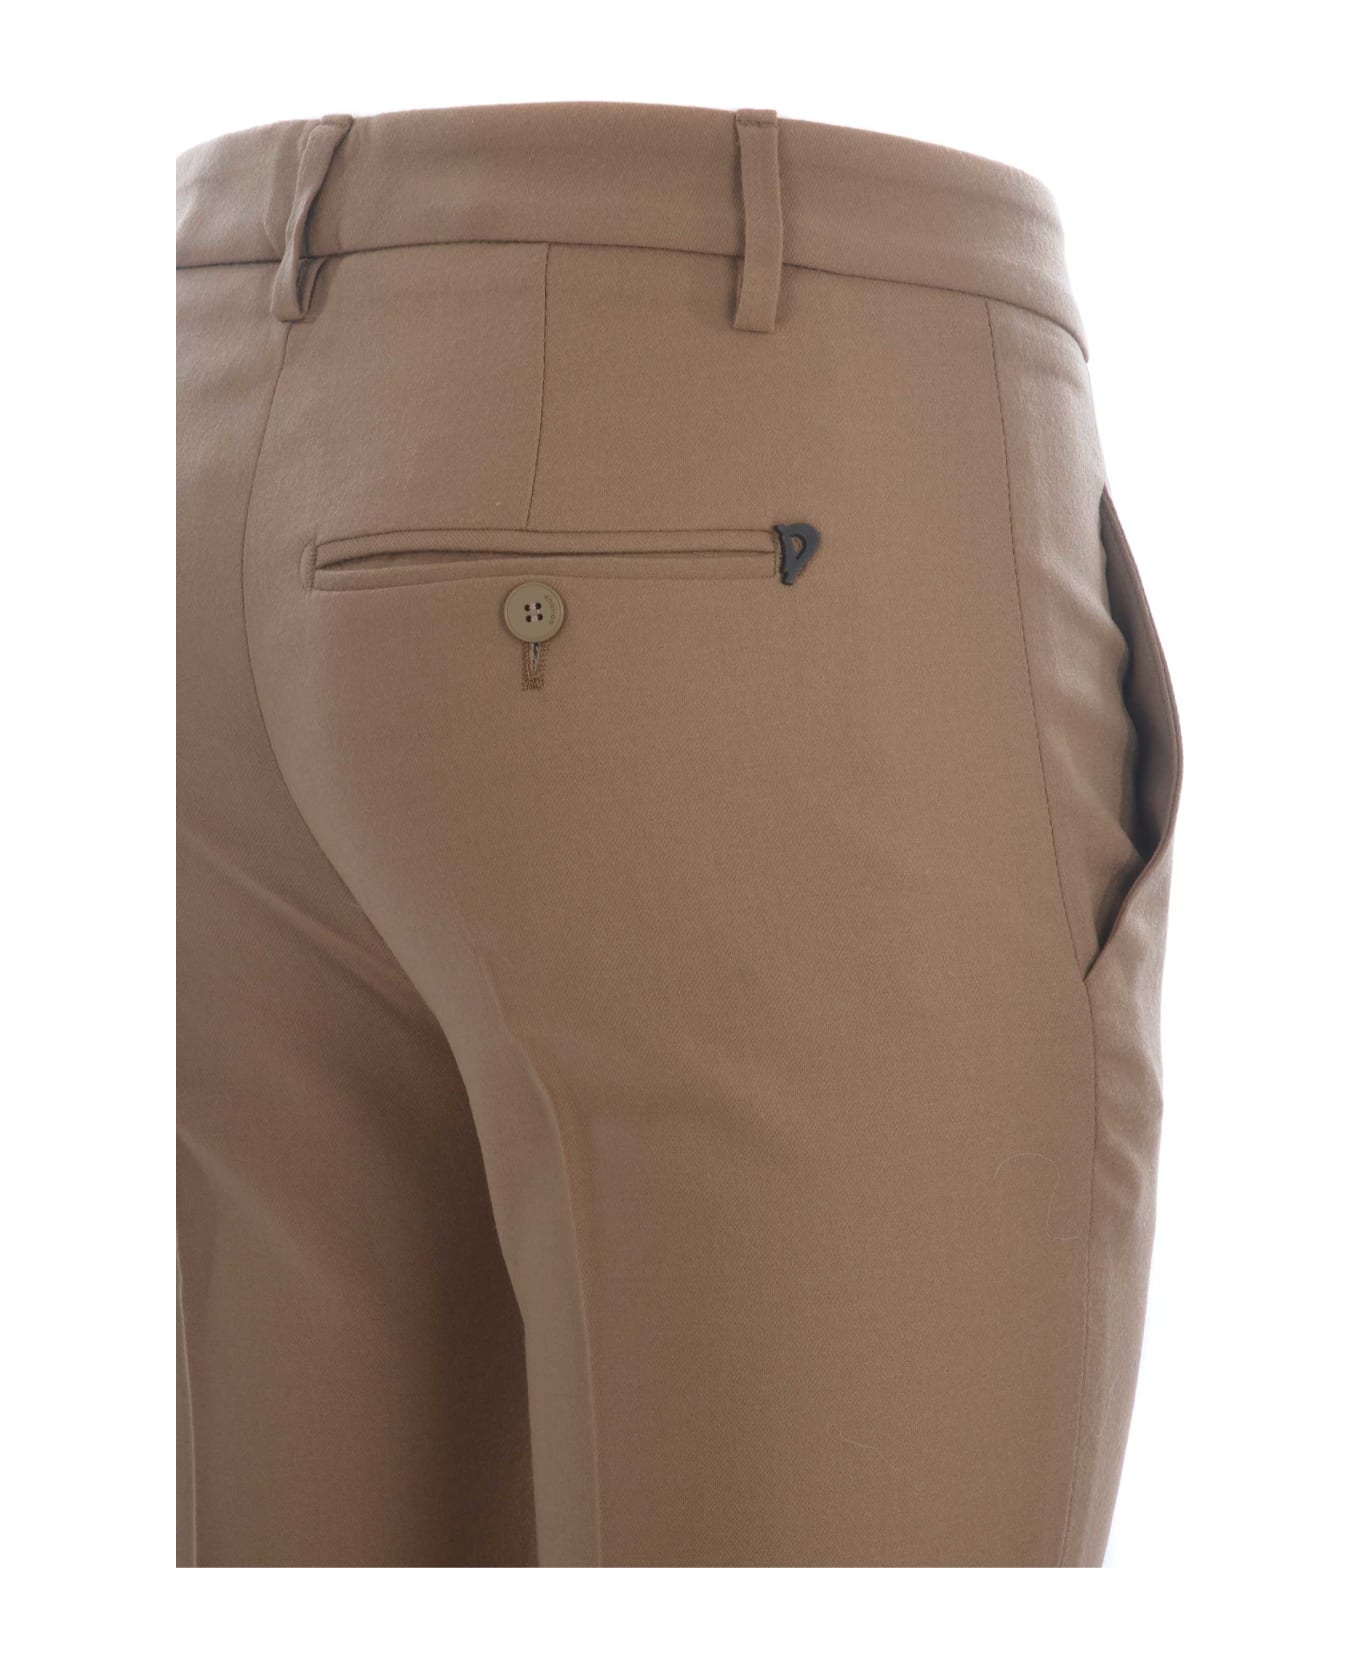 Dondup Trousers Dondup "perfect" In Virgin Wool - Cammello